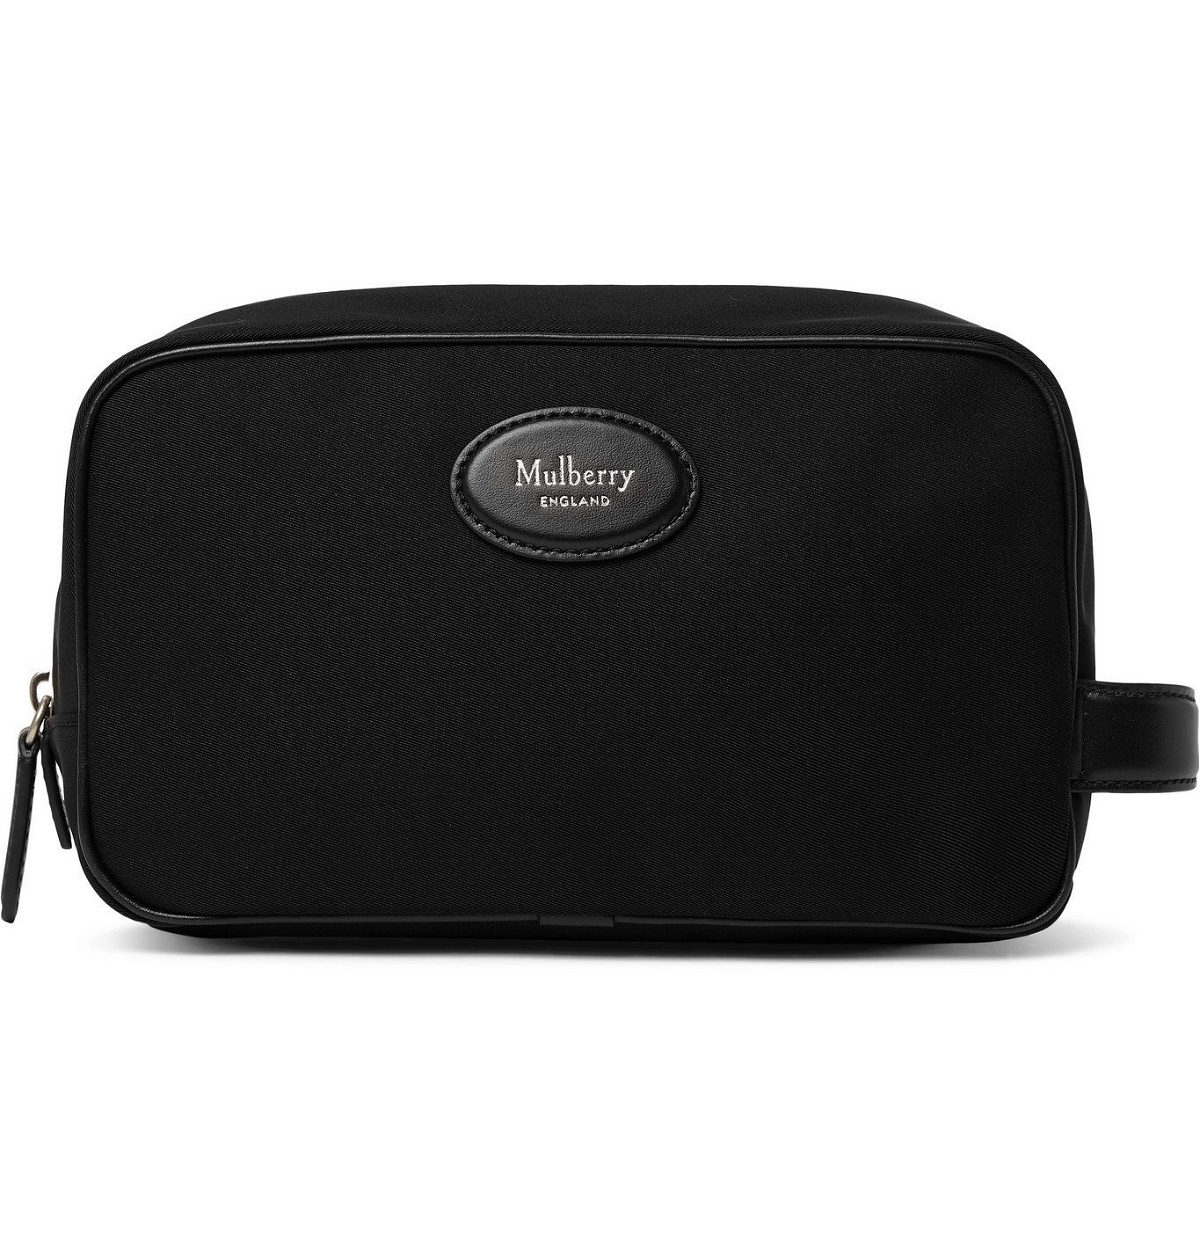 MULBERRY - Leather-Trimmed Nylon Wash Bag - Black Mulberry